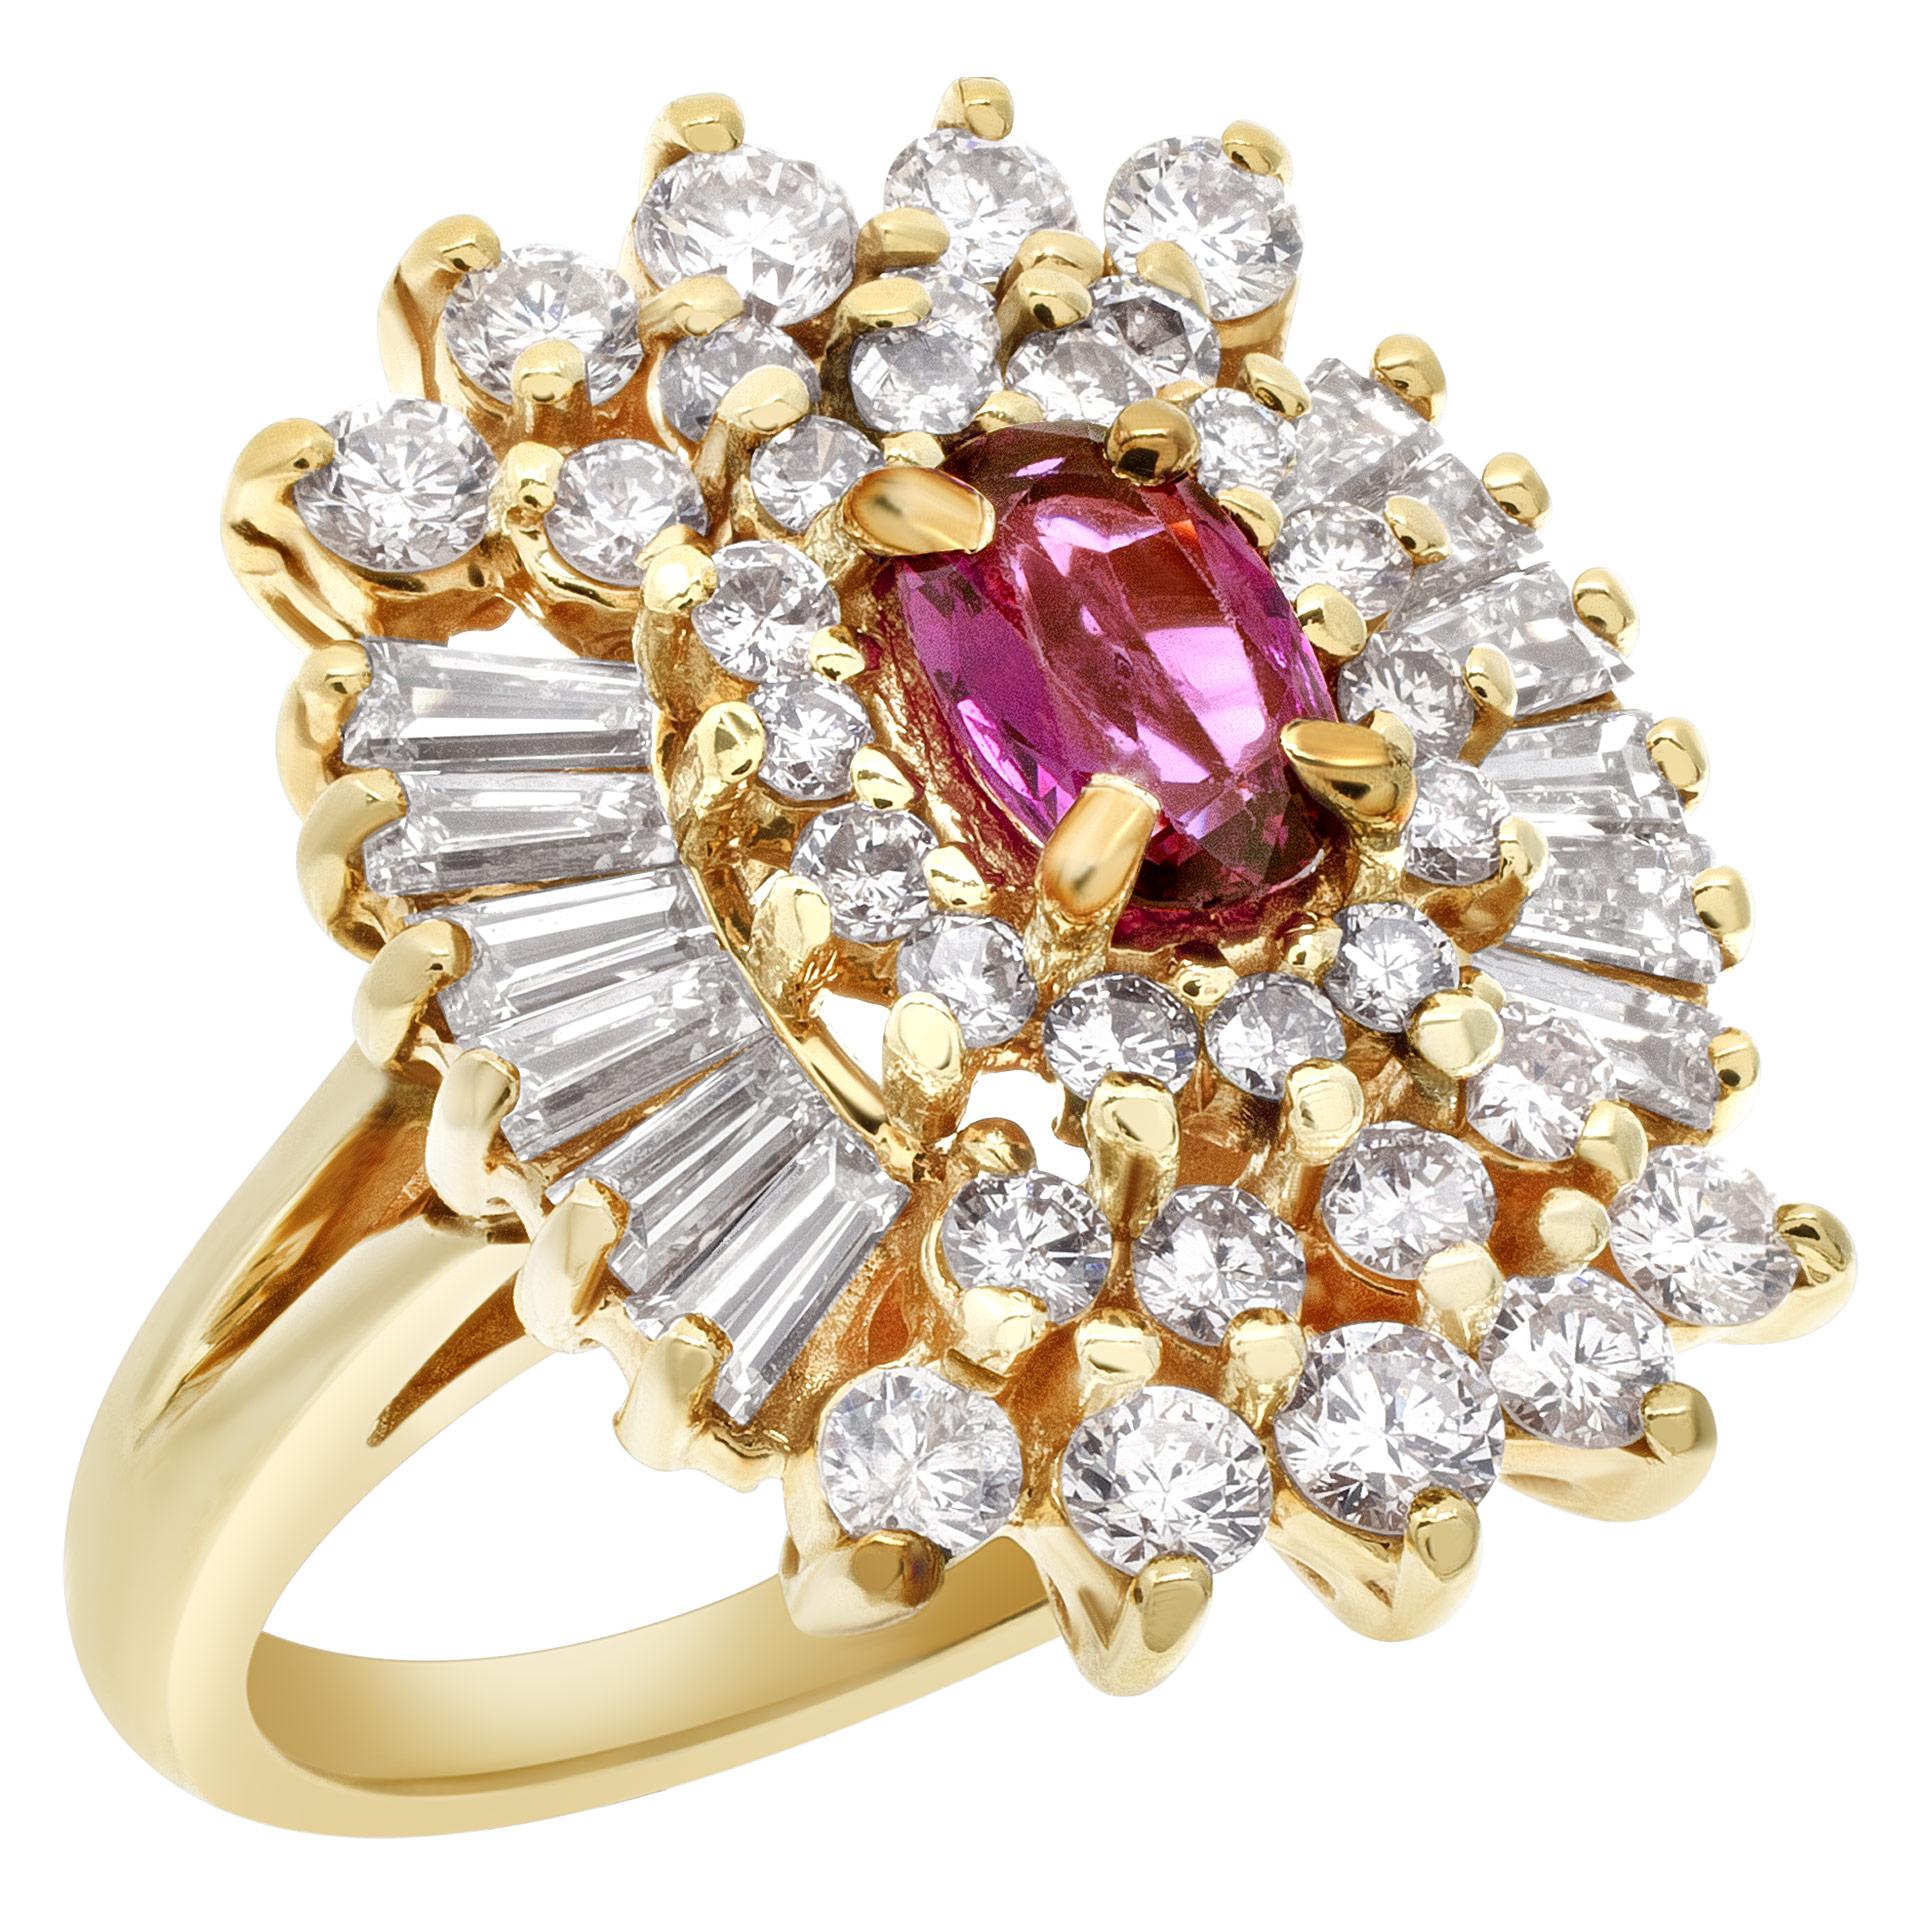 Ballerina ruby & diamond ring in 14k yellow gold with approximately 1.28 carats in round and baguette diamonds. Dimensions at head: 16.2mm x 20.5mm. Width at shank: 1.6mm. Size 5.25.  This Ruby ring is currently size 5.25 and some items can be sized